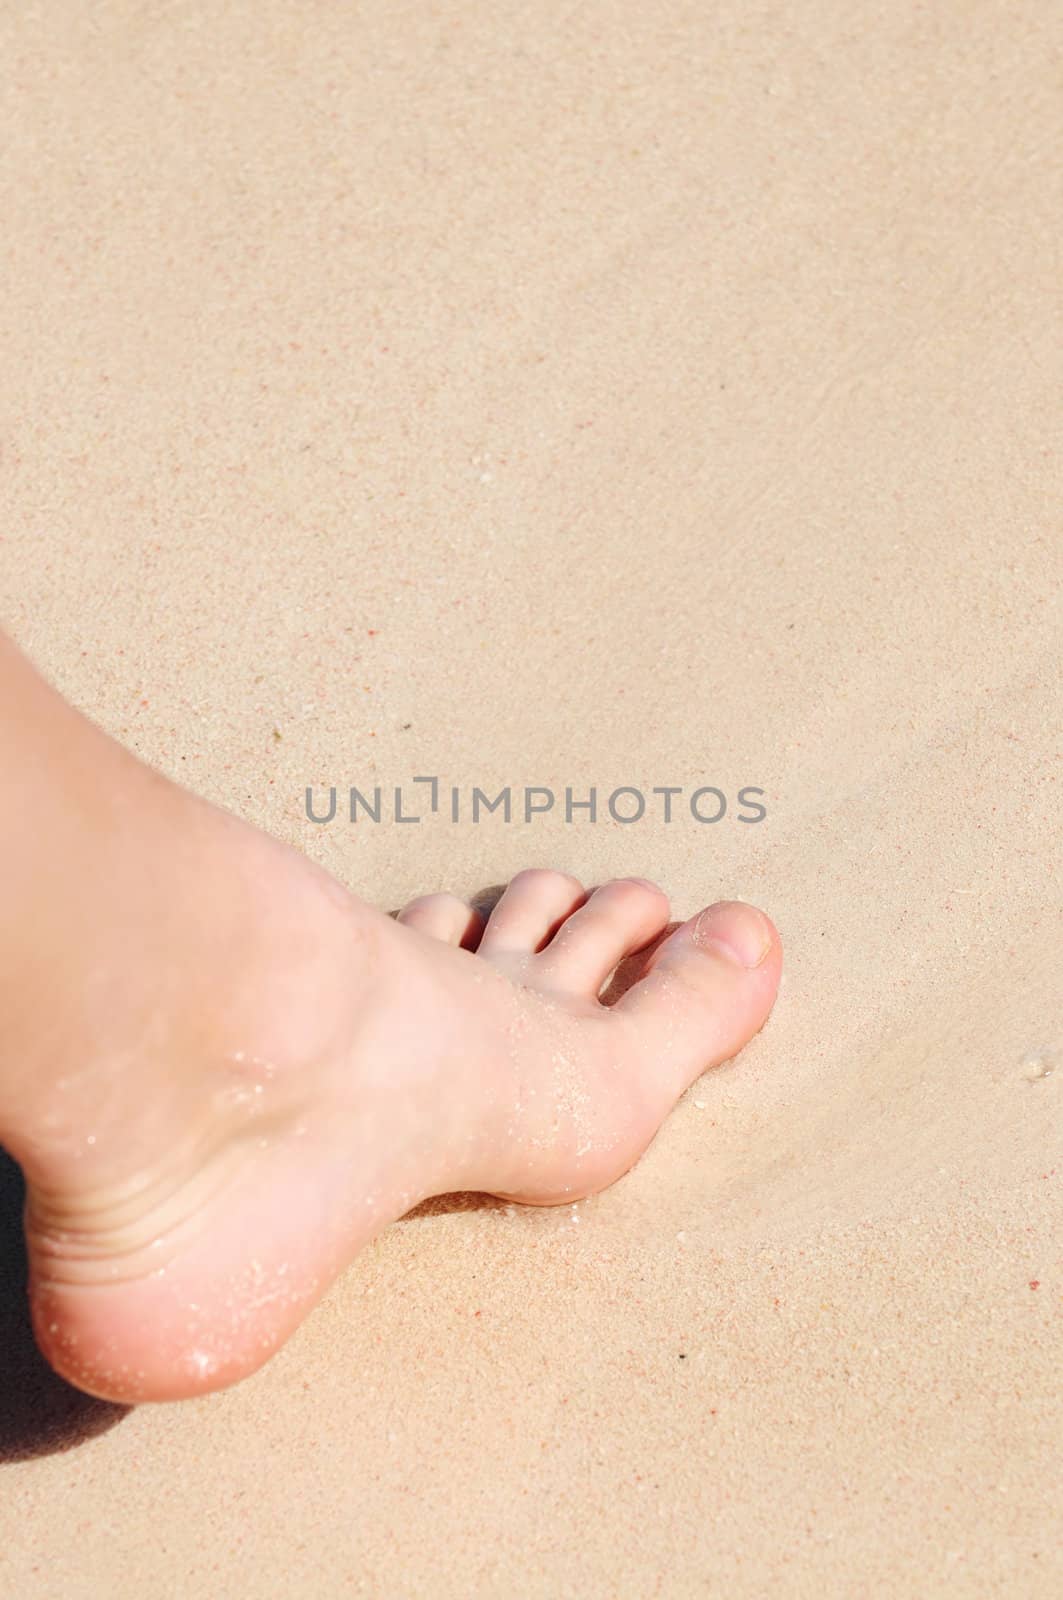 Young woman's foot on a sandy beach